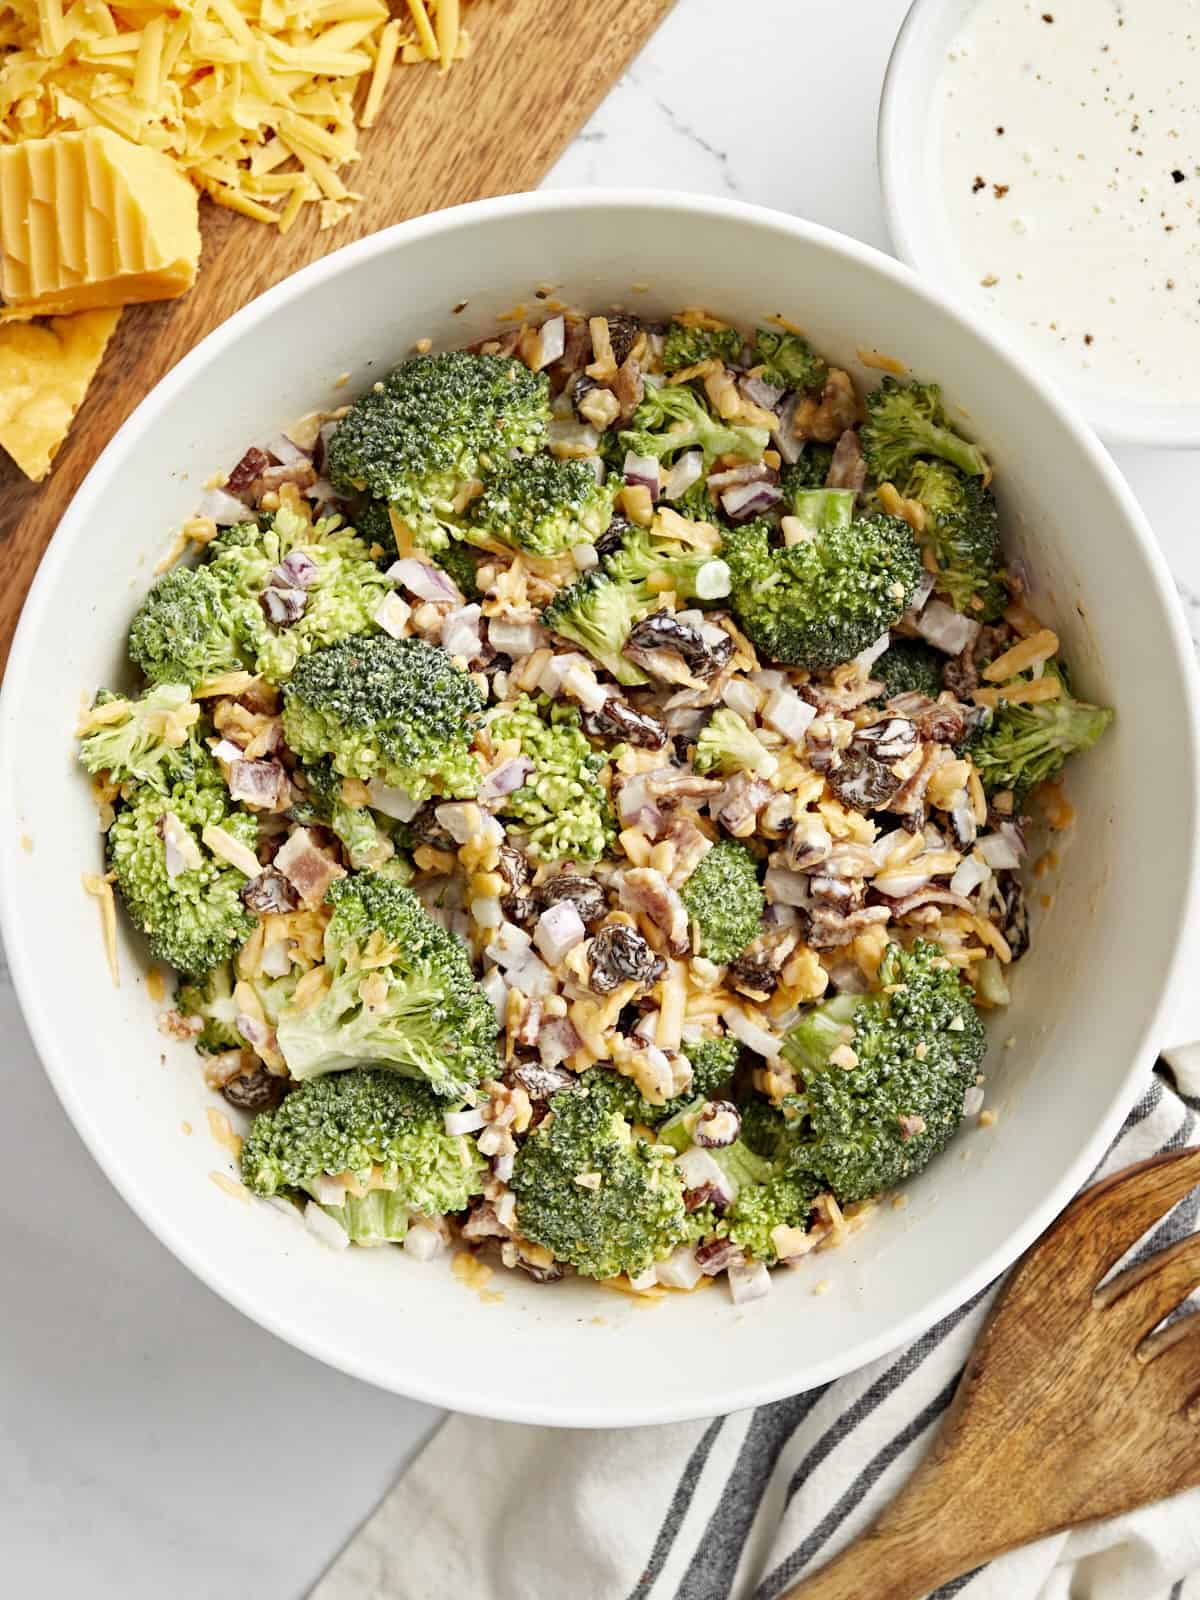 Top view of broccoli salad in a white bowl.